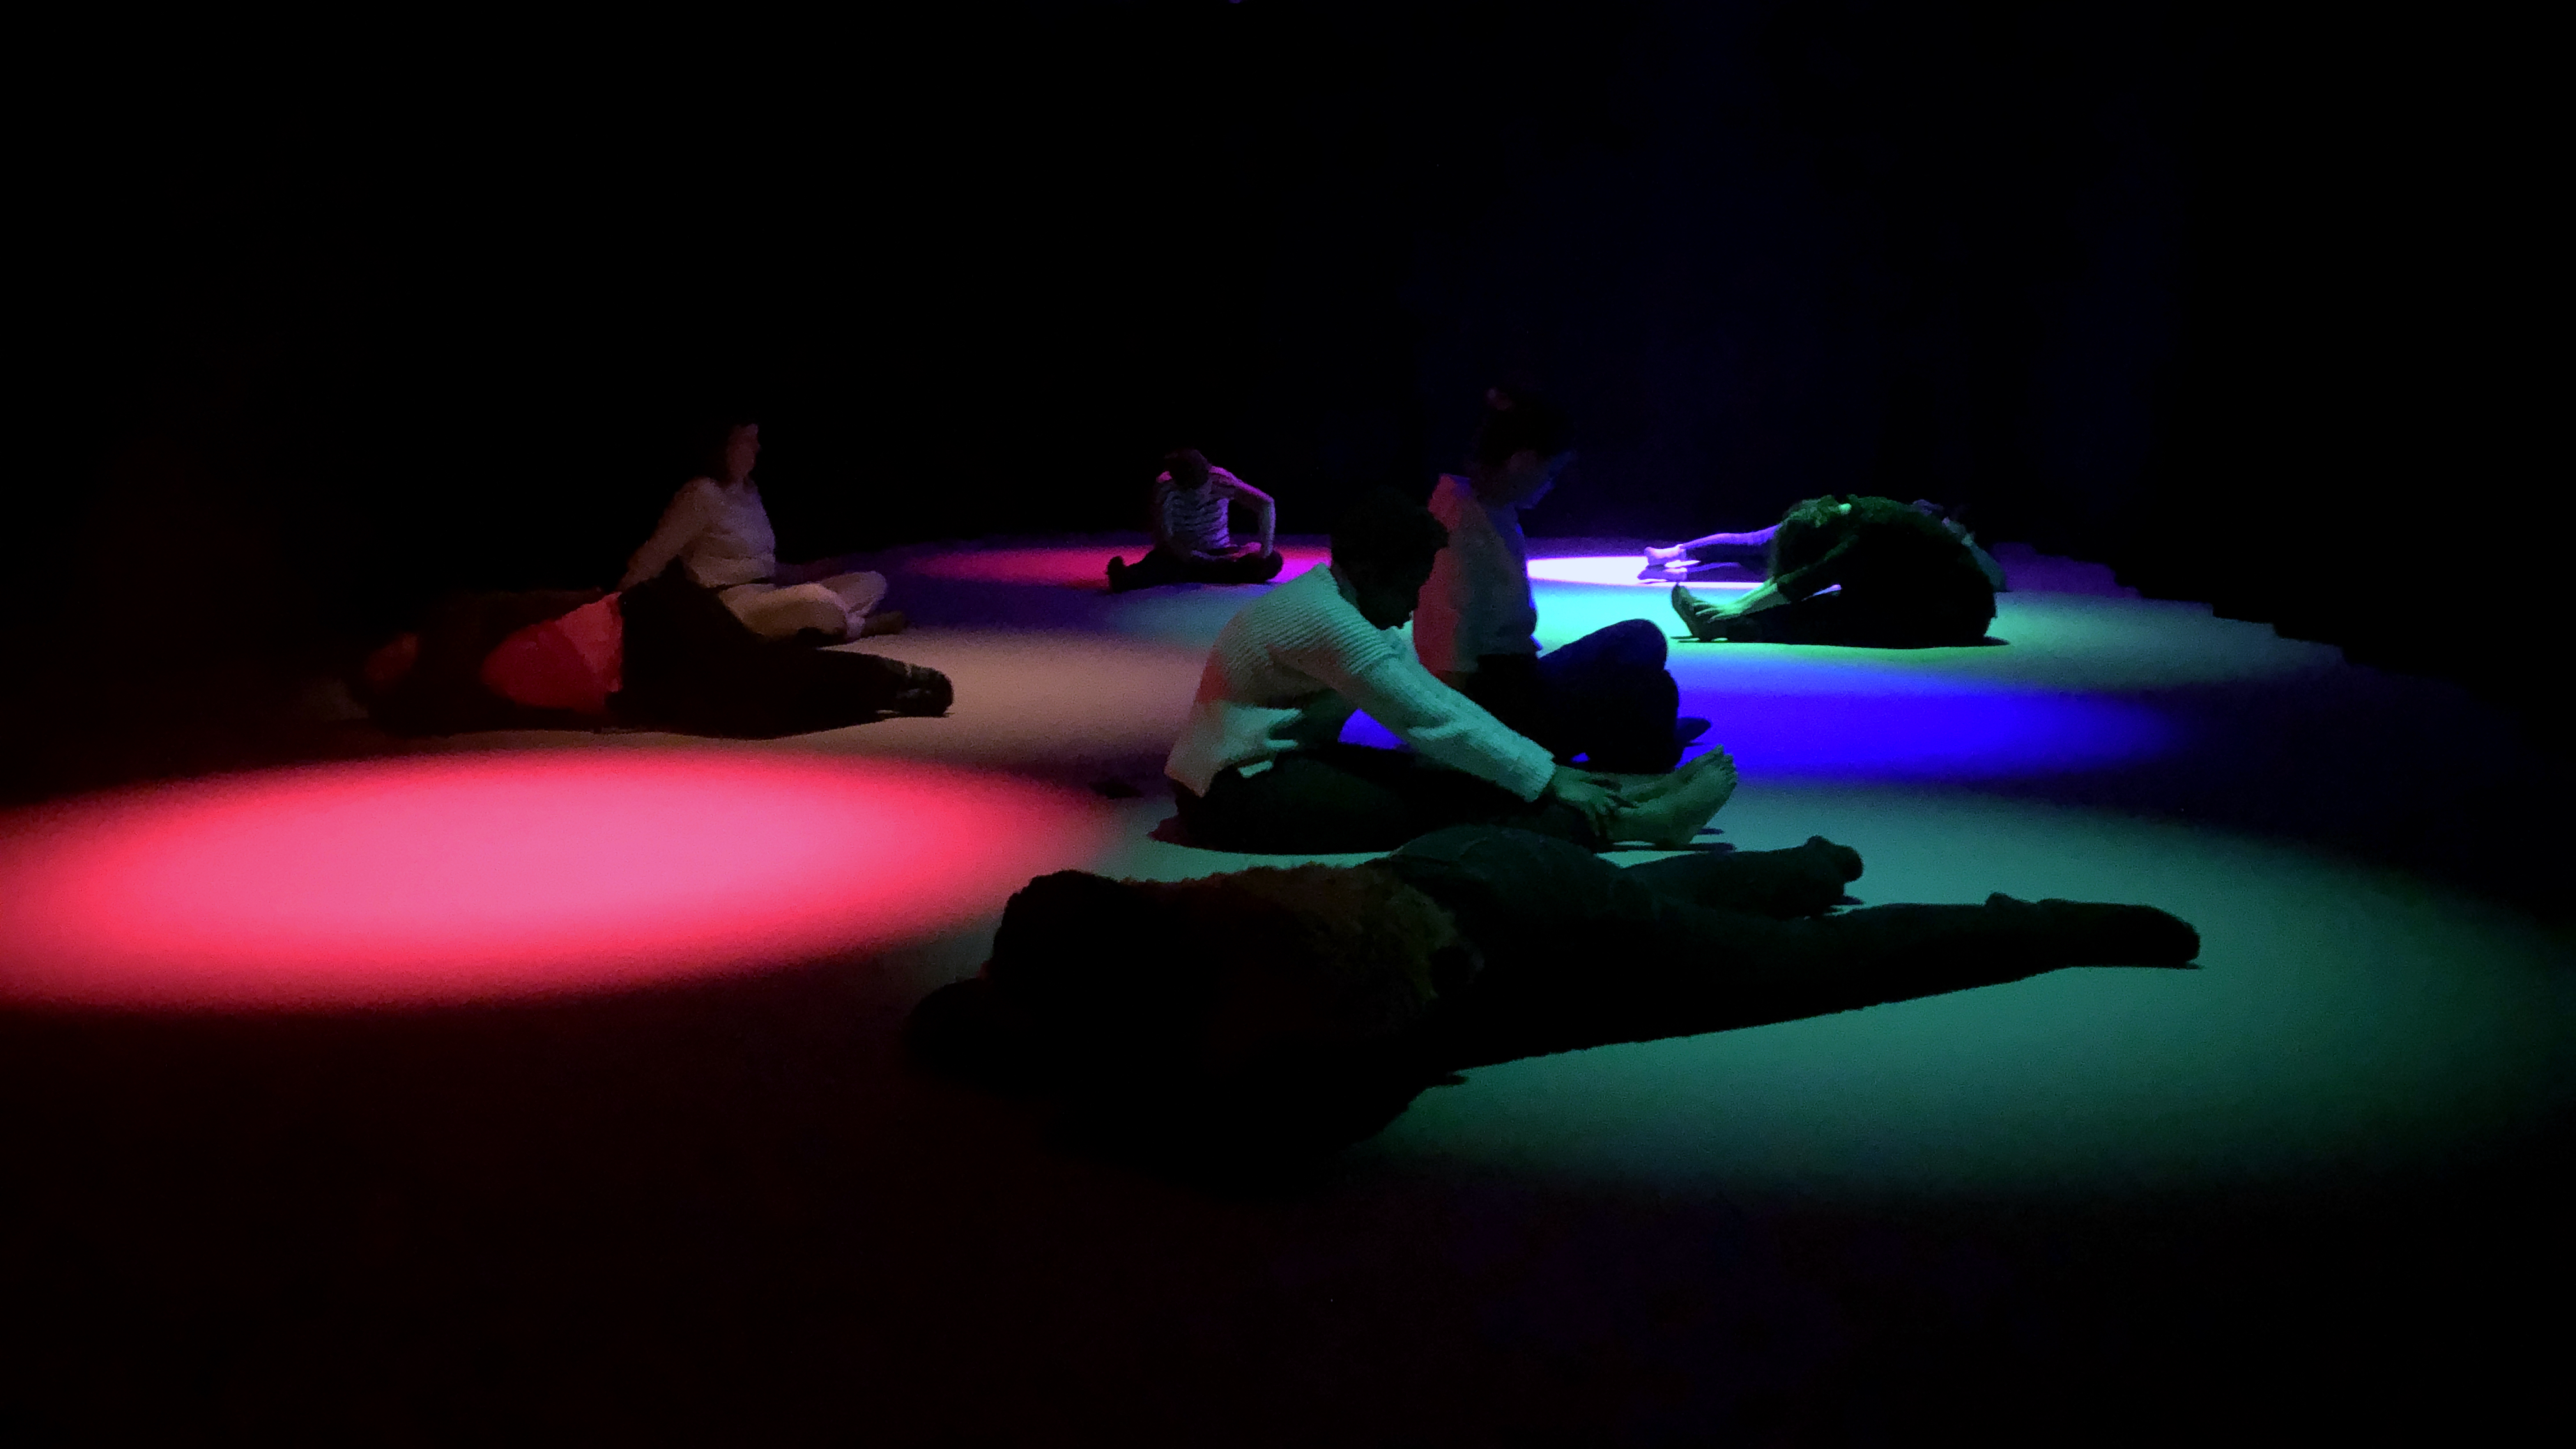 Stillness lab participants in brightly colored red and blue spotlights